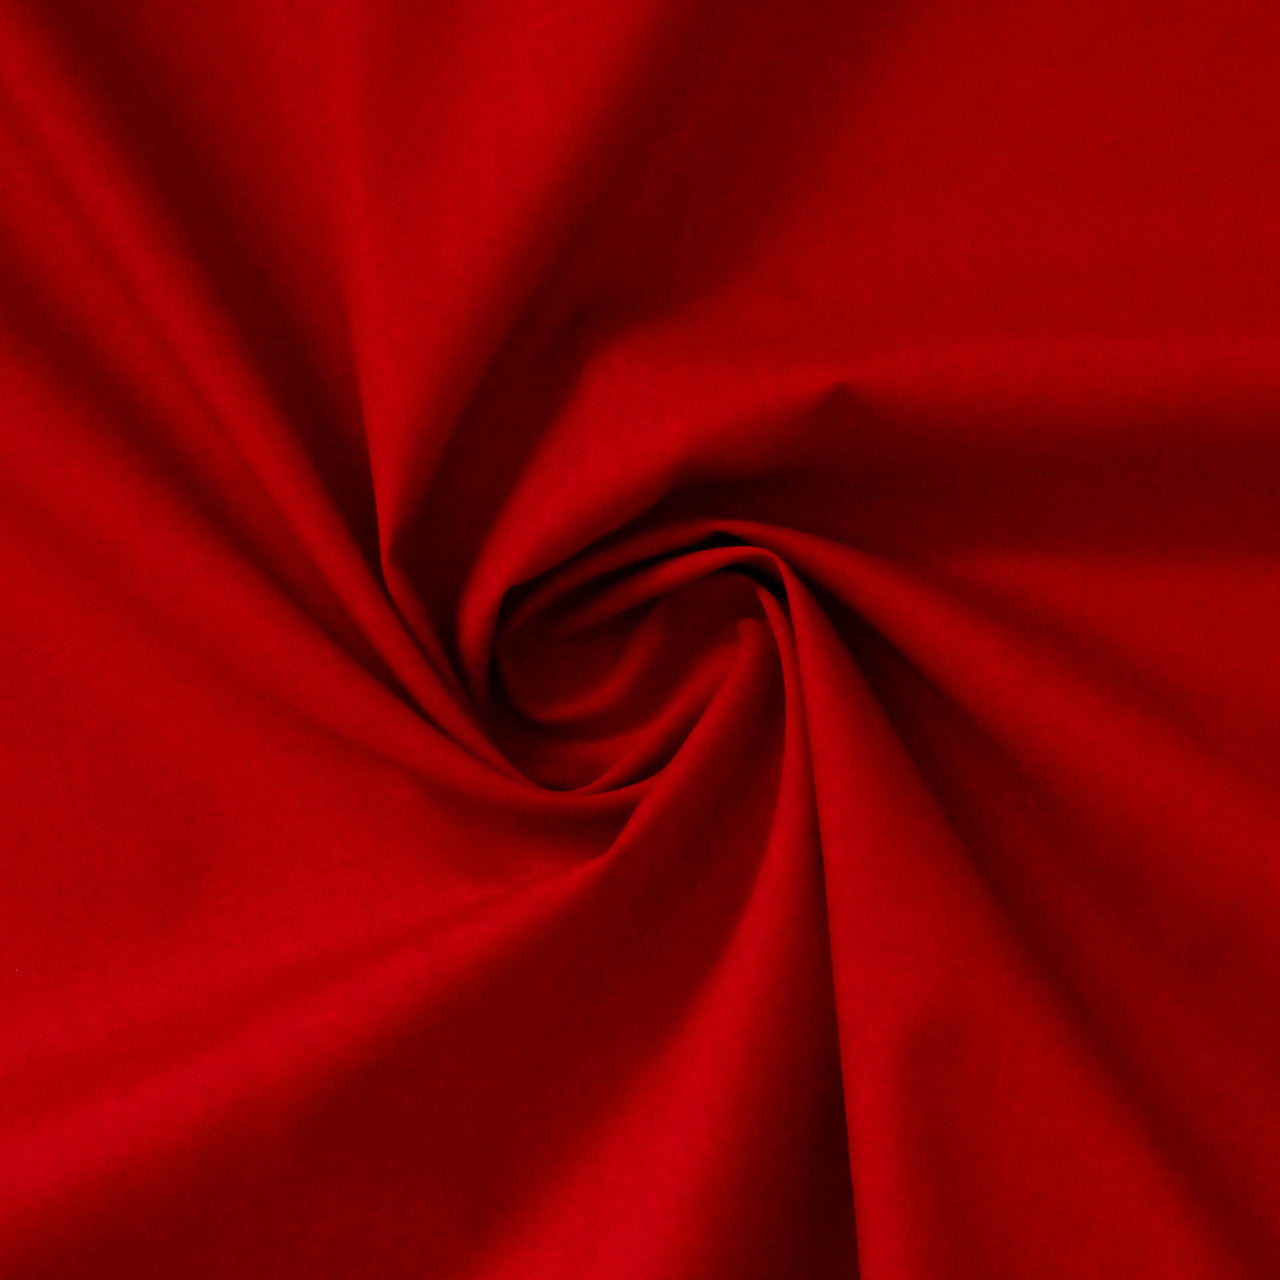 Cherry Red - Superior Quality Plain Poly Cotton - Width 114cm